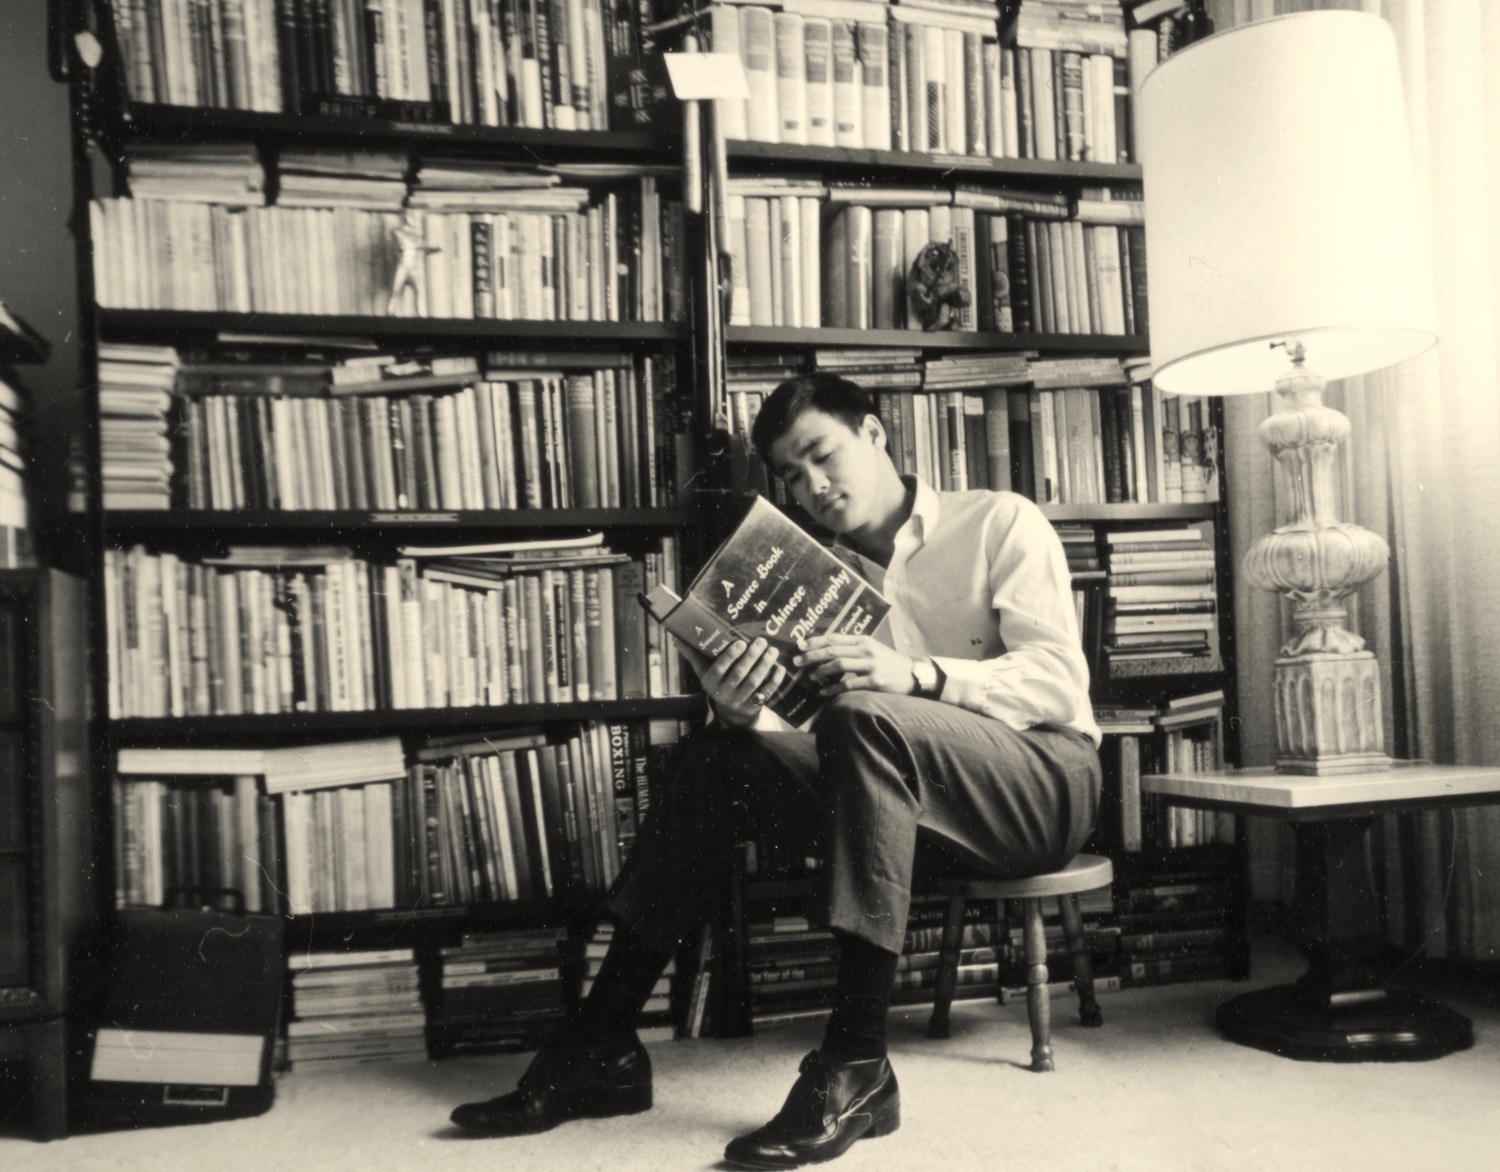 Bruce Lee while reading a book in a library